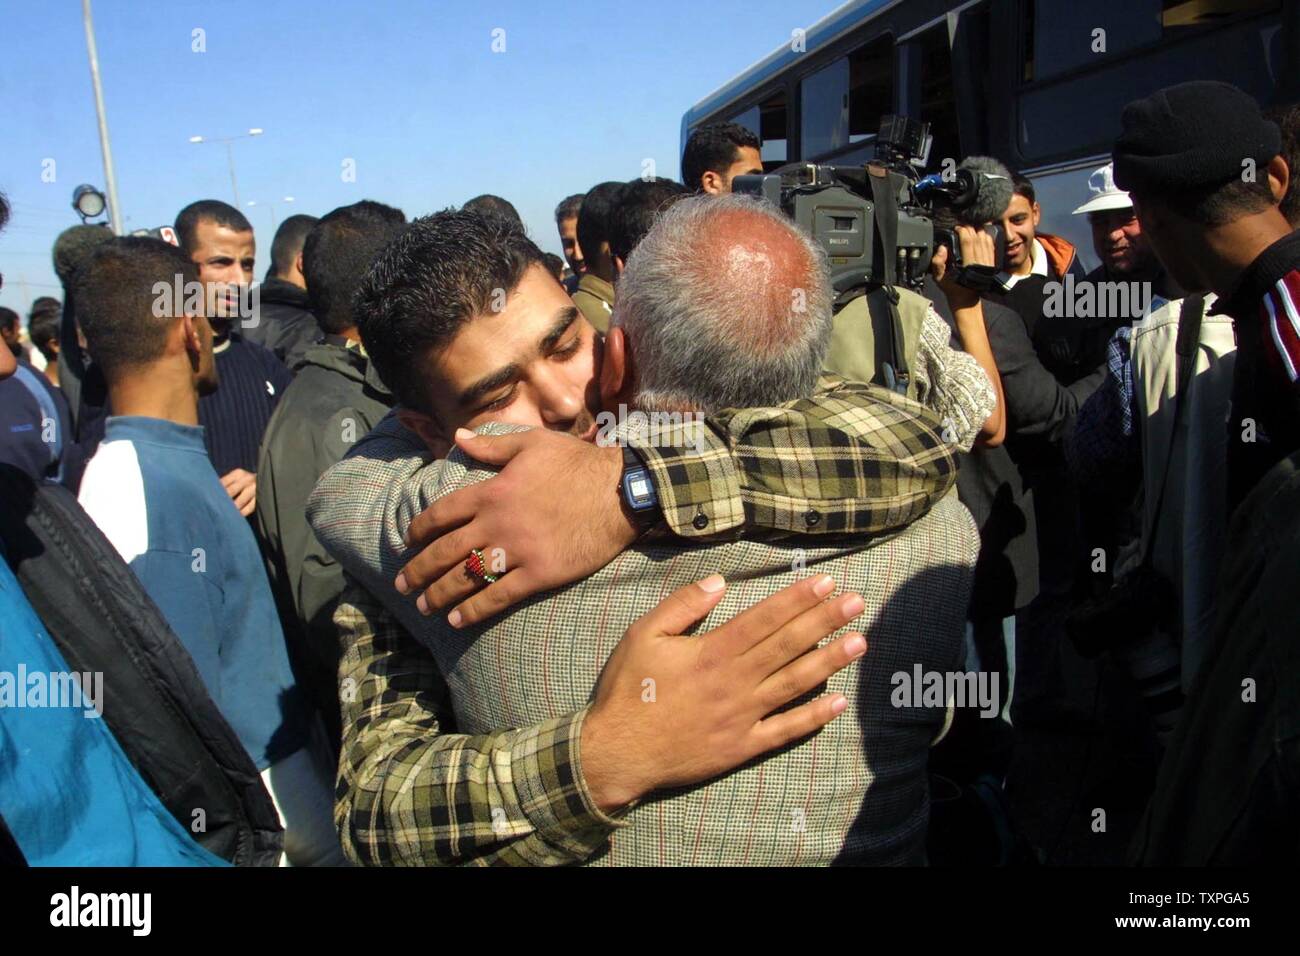 Palestinian prisoners  are greeted by relatives after being released by authorities from an Israeli jail, at the Erez Crossing, northern Gaza Strip on January 29, 2004. Israel released 400 Palestinian prisoners Thursday as part of a swap with Lebanese guerrilla group Hezbollah. Jubilant relatives greeted the freed prisoners at checkpoints Gaza Strip with cheers of thanks to Hezbollah.  (UPI photo/Ismail Mohamad) Stock Photo